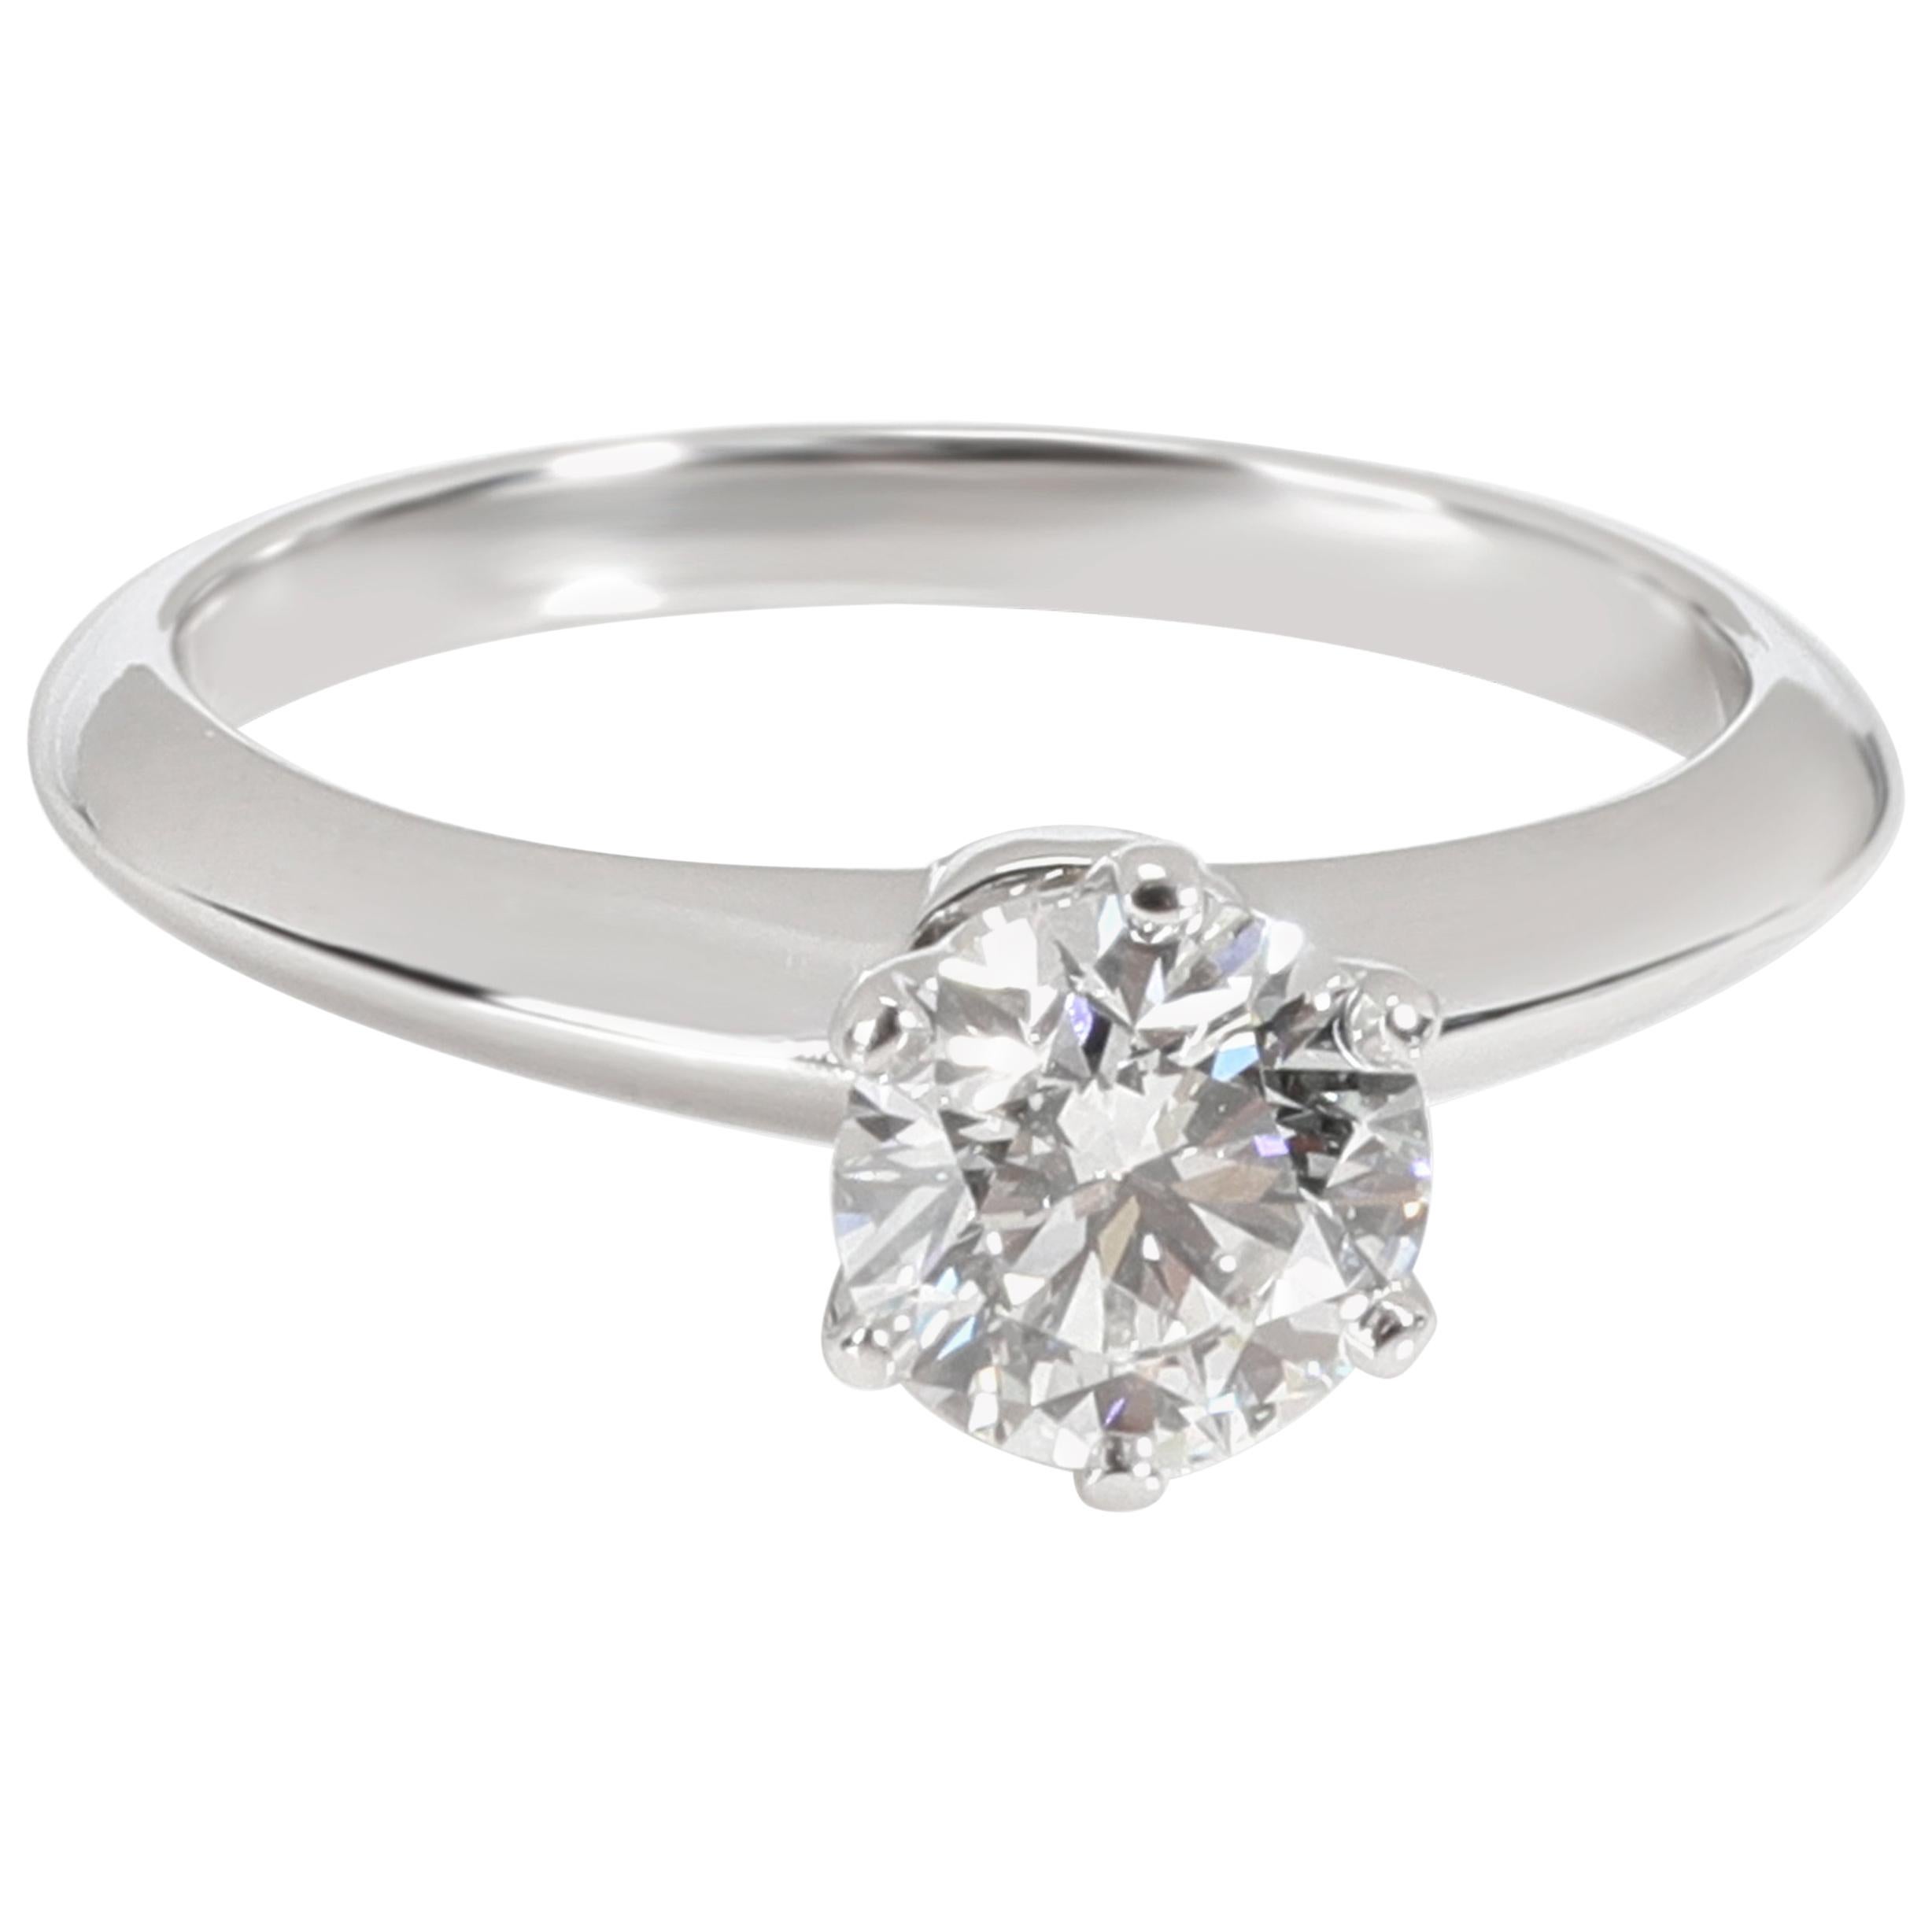 Tiffany & Co. Solitaire Diamond Engagement Ring in Platinum G IF 0.92 Carat